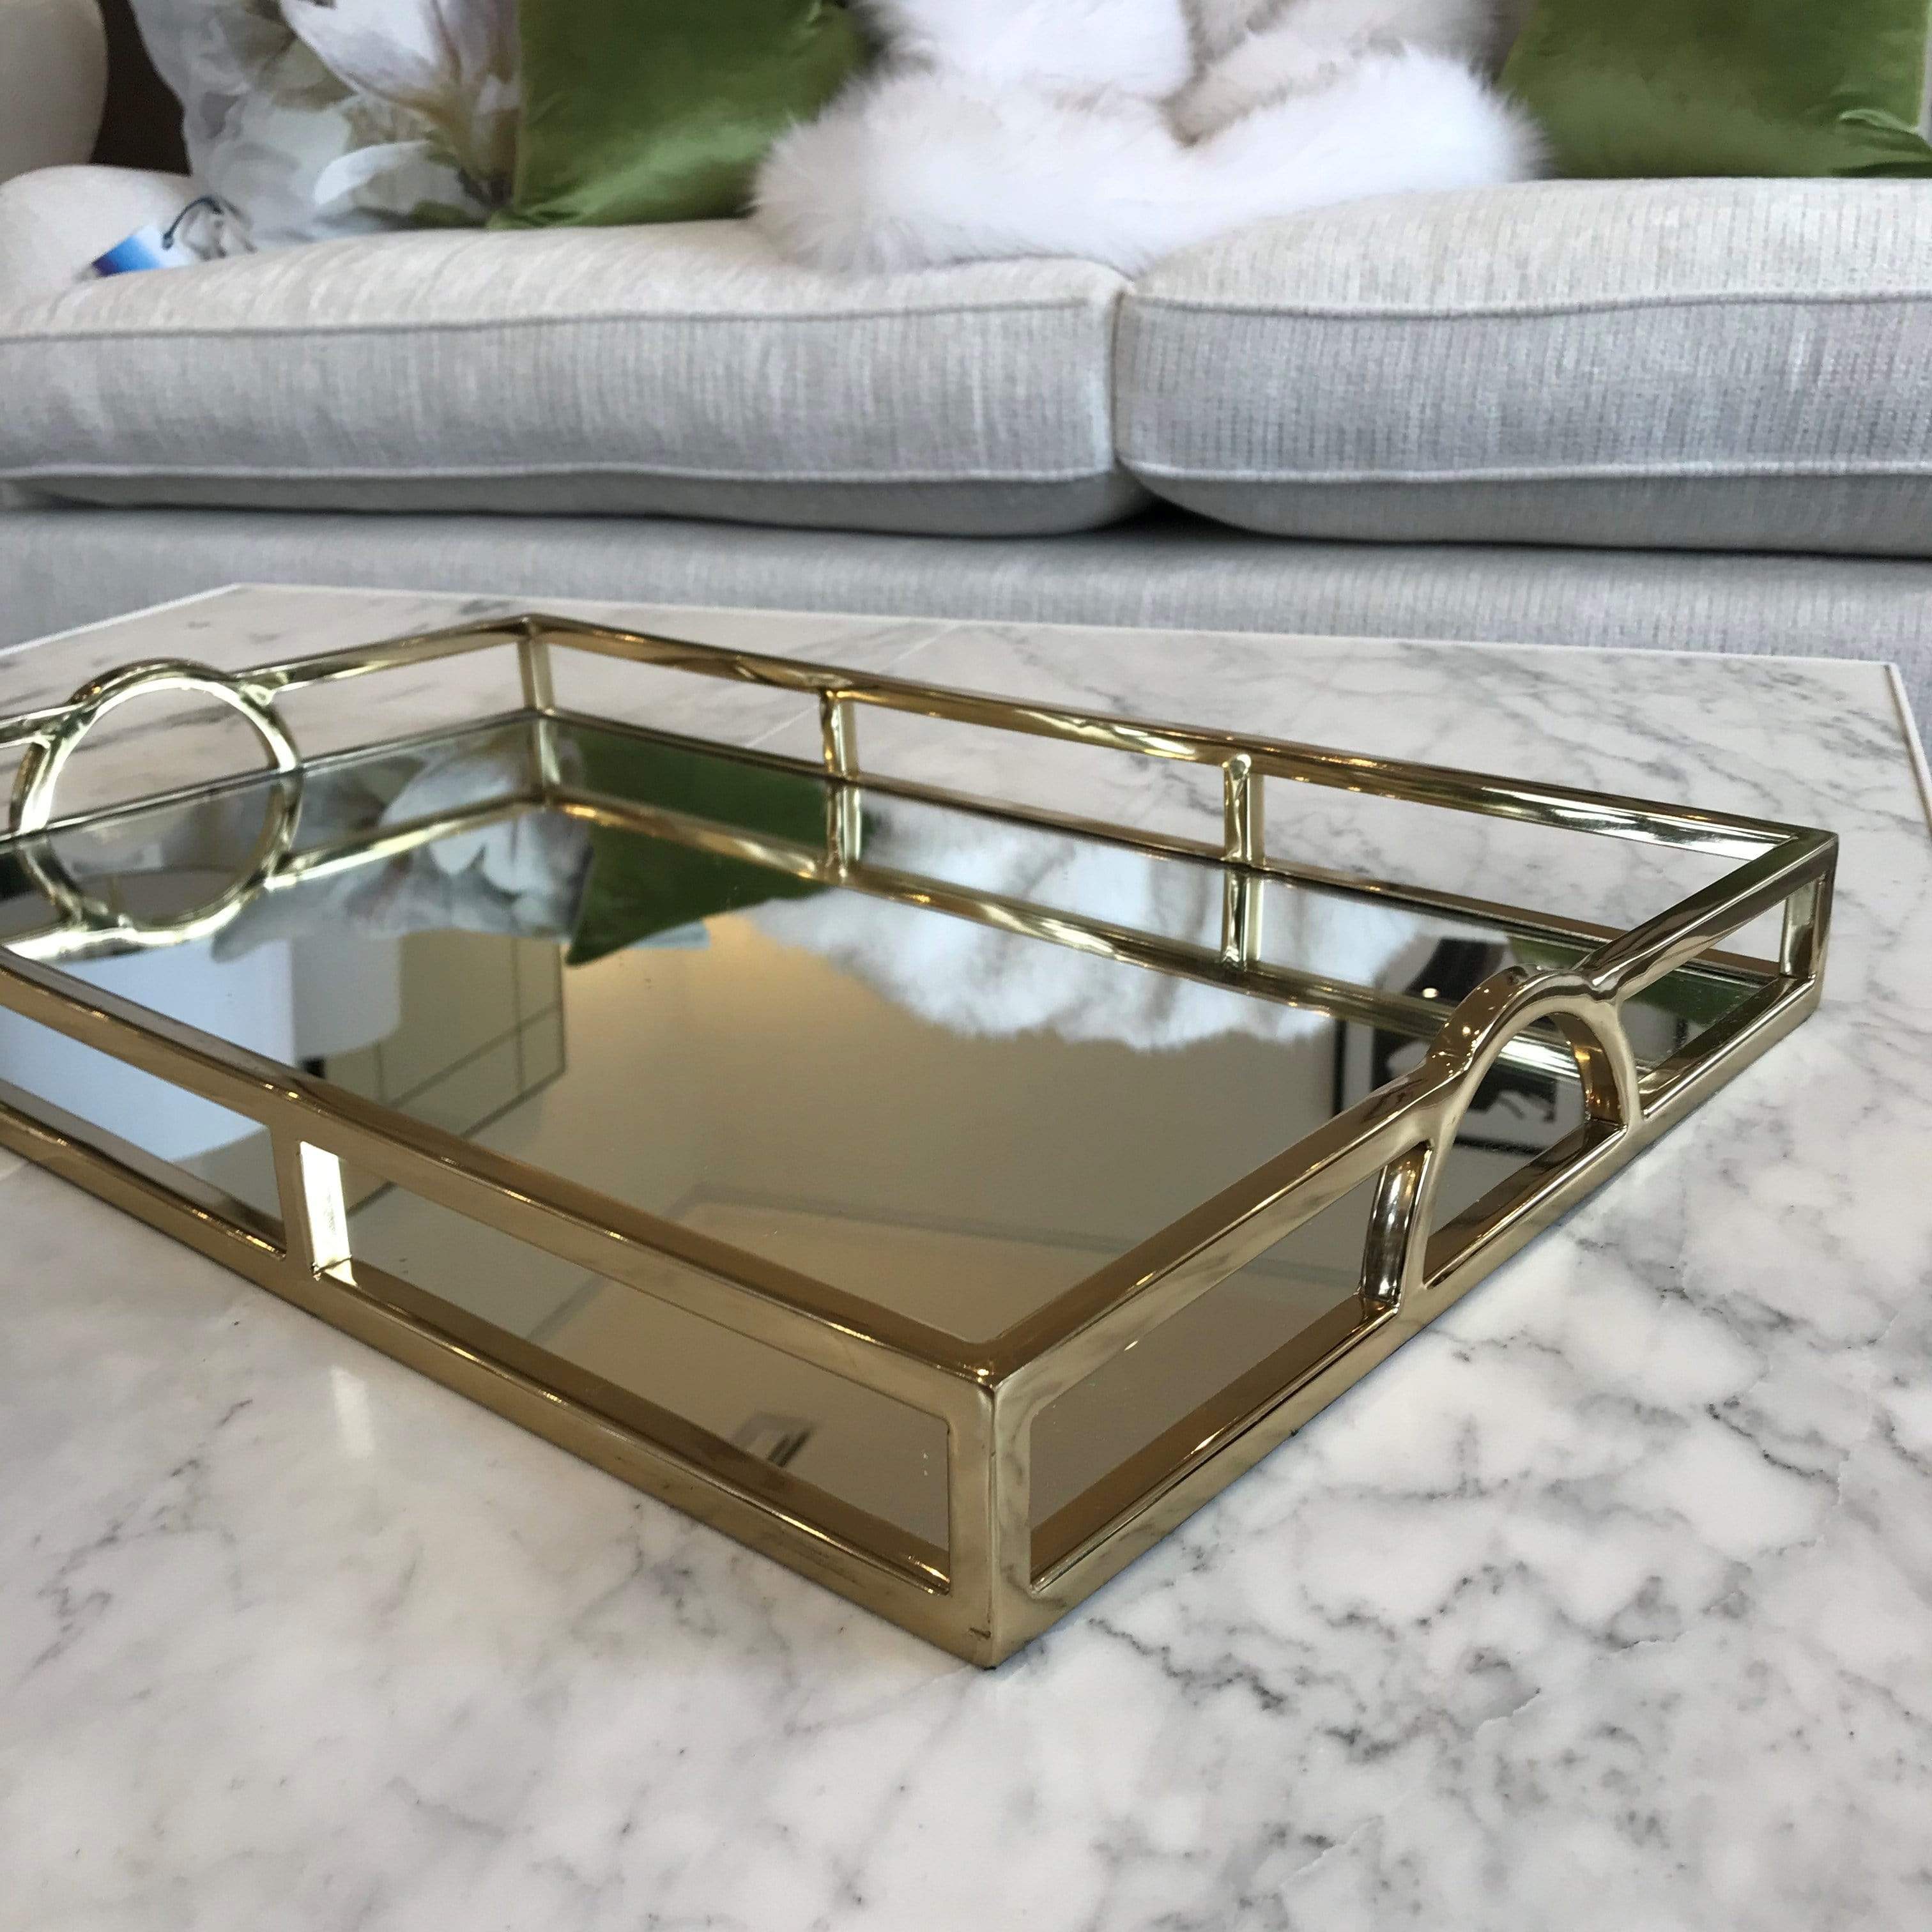 Gaudion Furniture Tray Gold Mirror Tray Tray Mirrored Gold